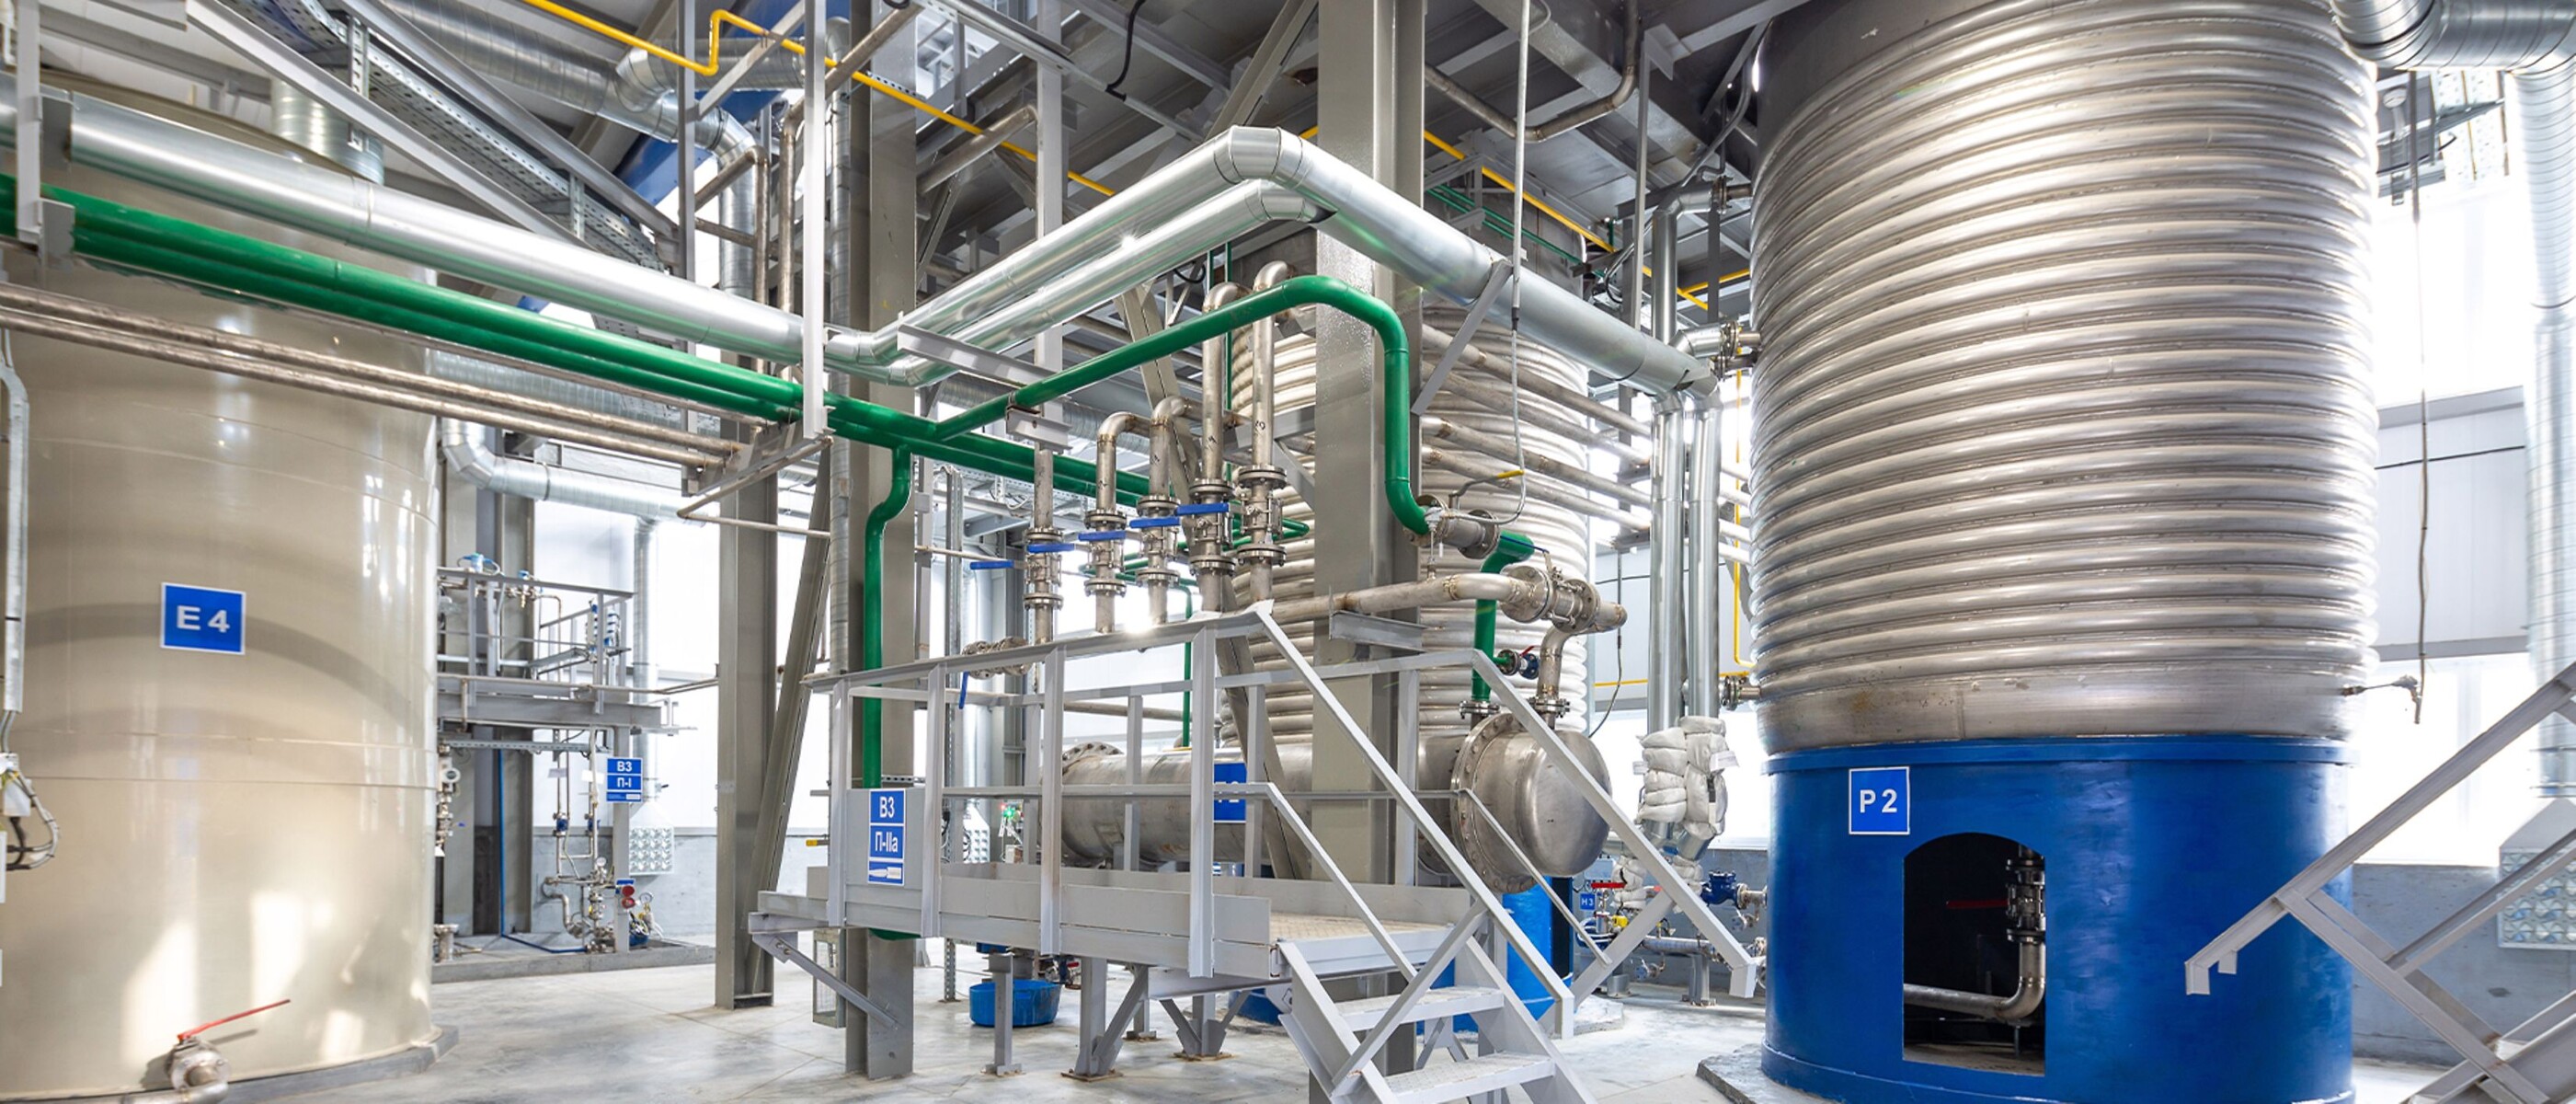 Large equipment and overhead piping inside a consumer chemicals factory